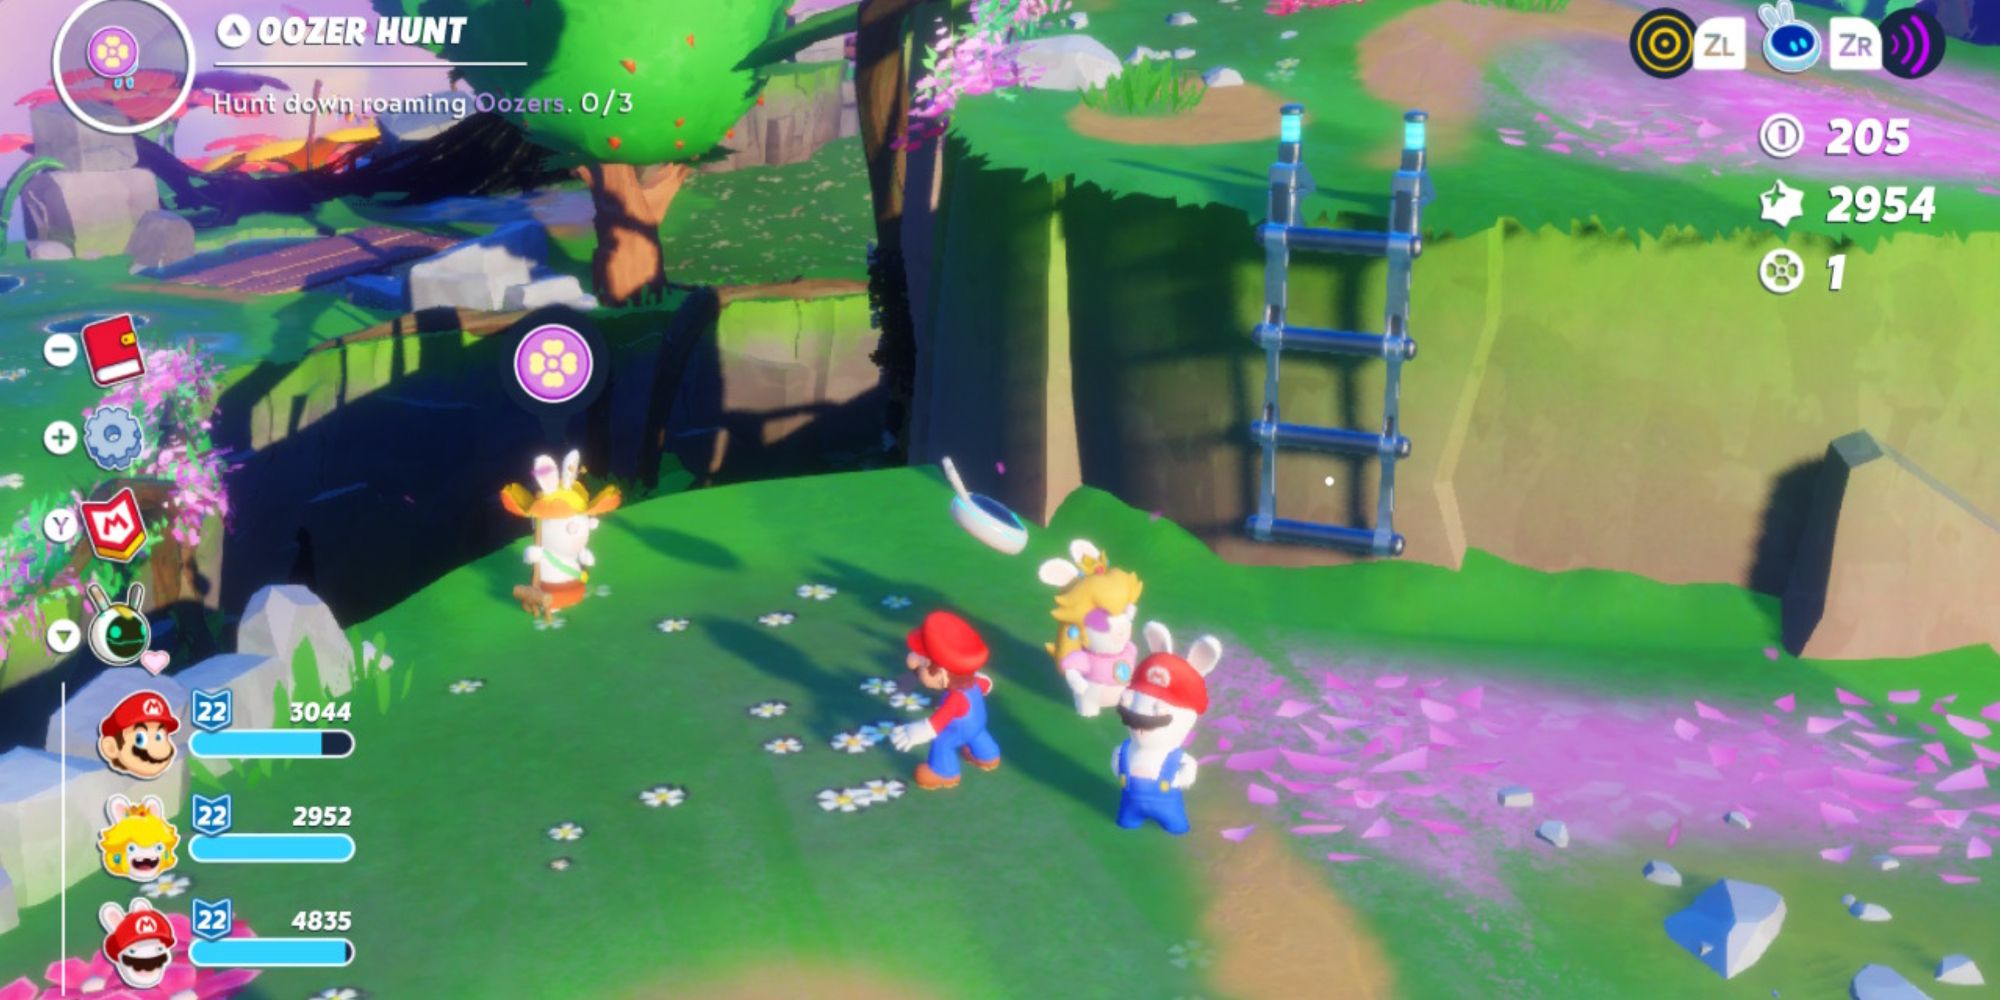 Mario Rabbids Sparks of Hope Oozer Hunt Side Quest Mario and Rabbids